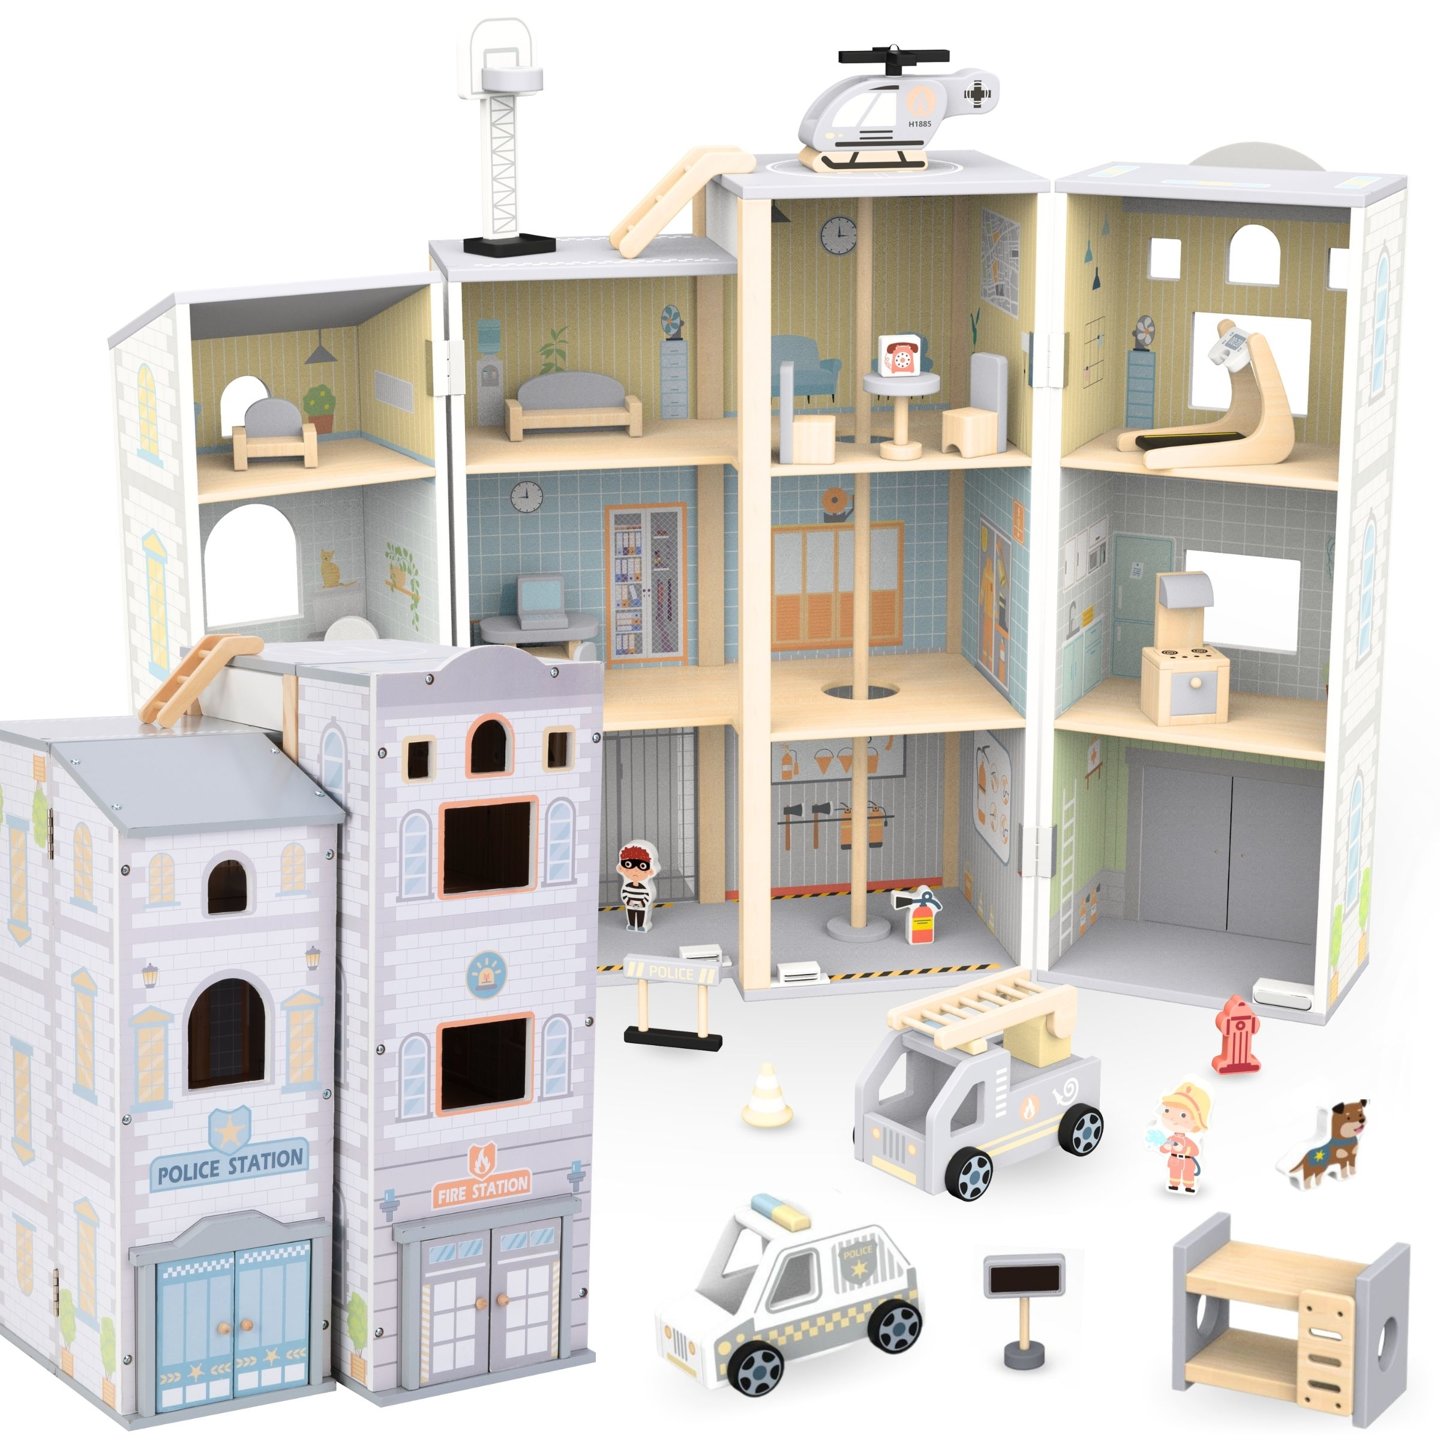 Large folding fire station with police station - wooden set. Fire station and police station with accessories.